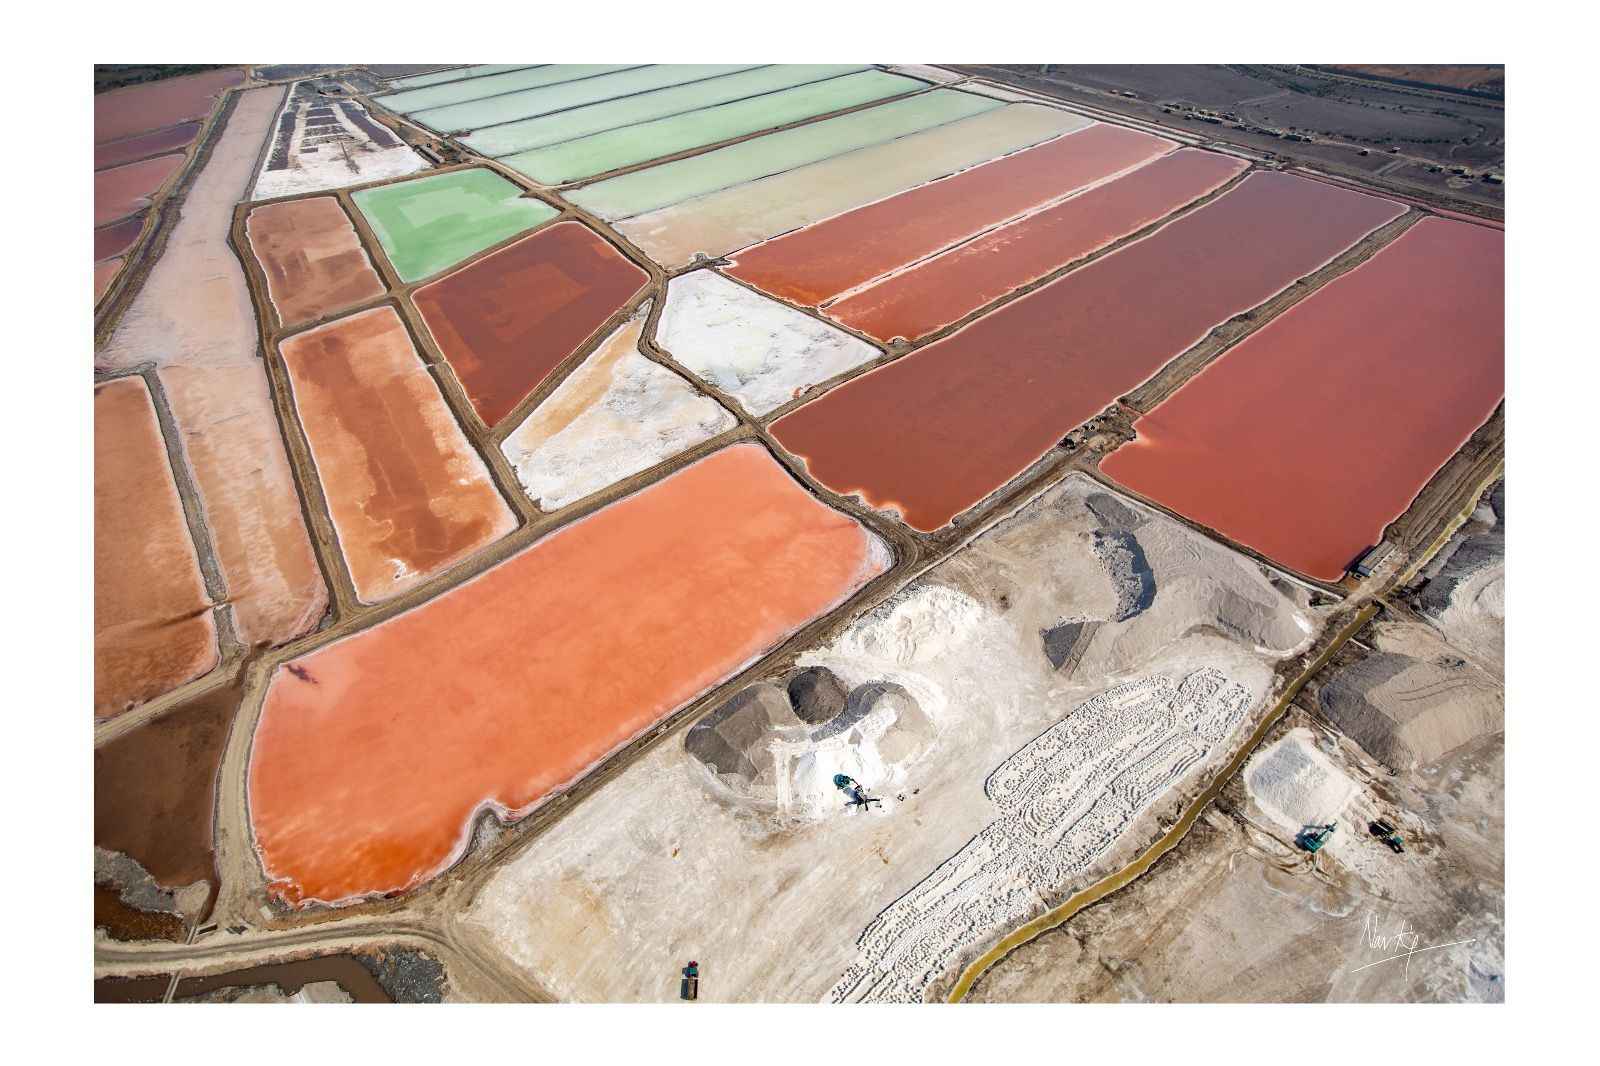 The salt evaporation ponds tend to turn different colours due to the level of salinity